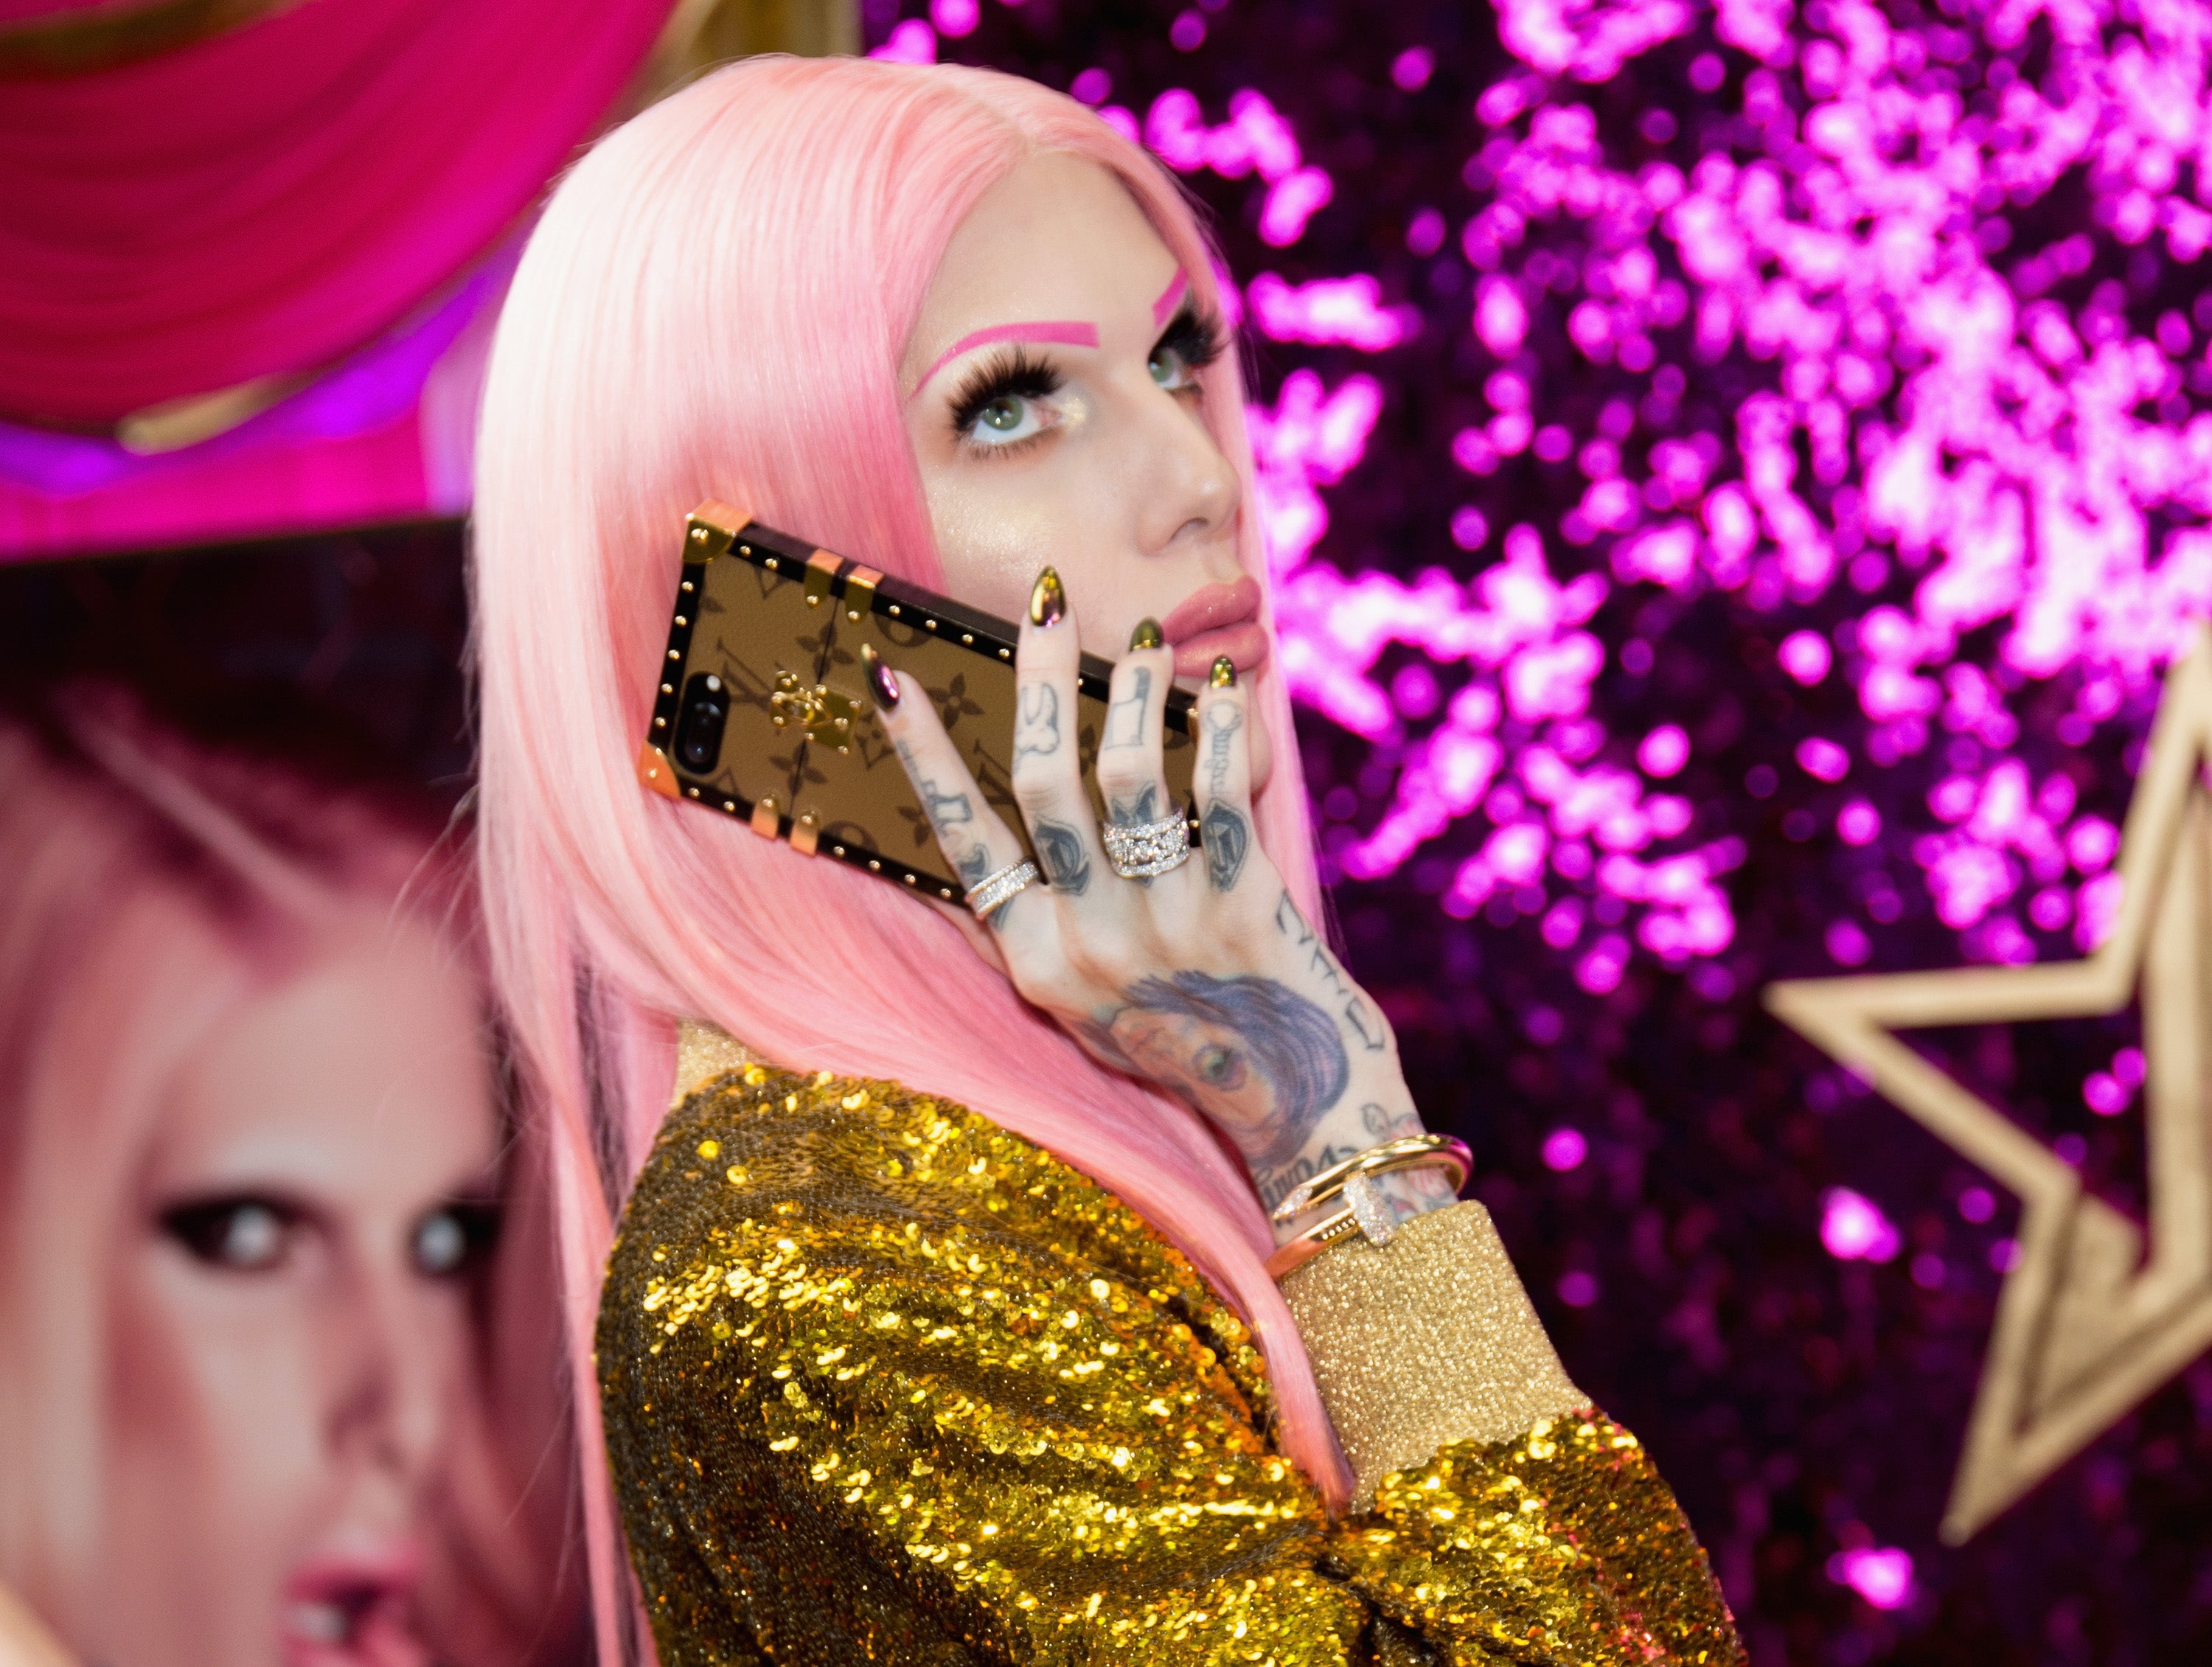 Desus and Mero Created A 'Mixtape' Of Beauty Blogger Jeffree Star's Racist Comments